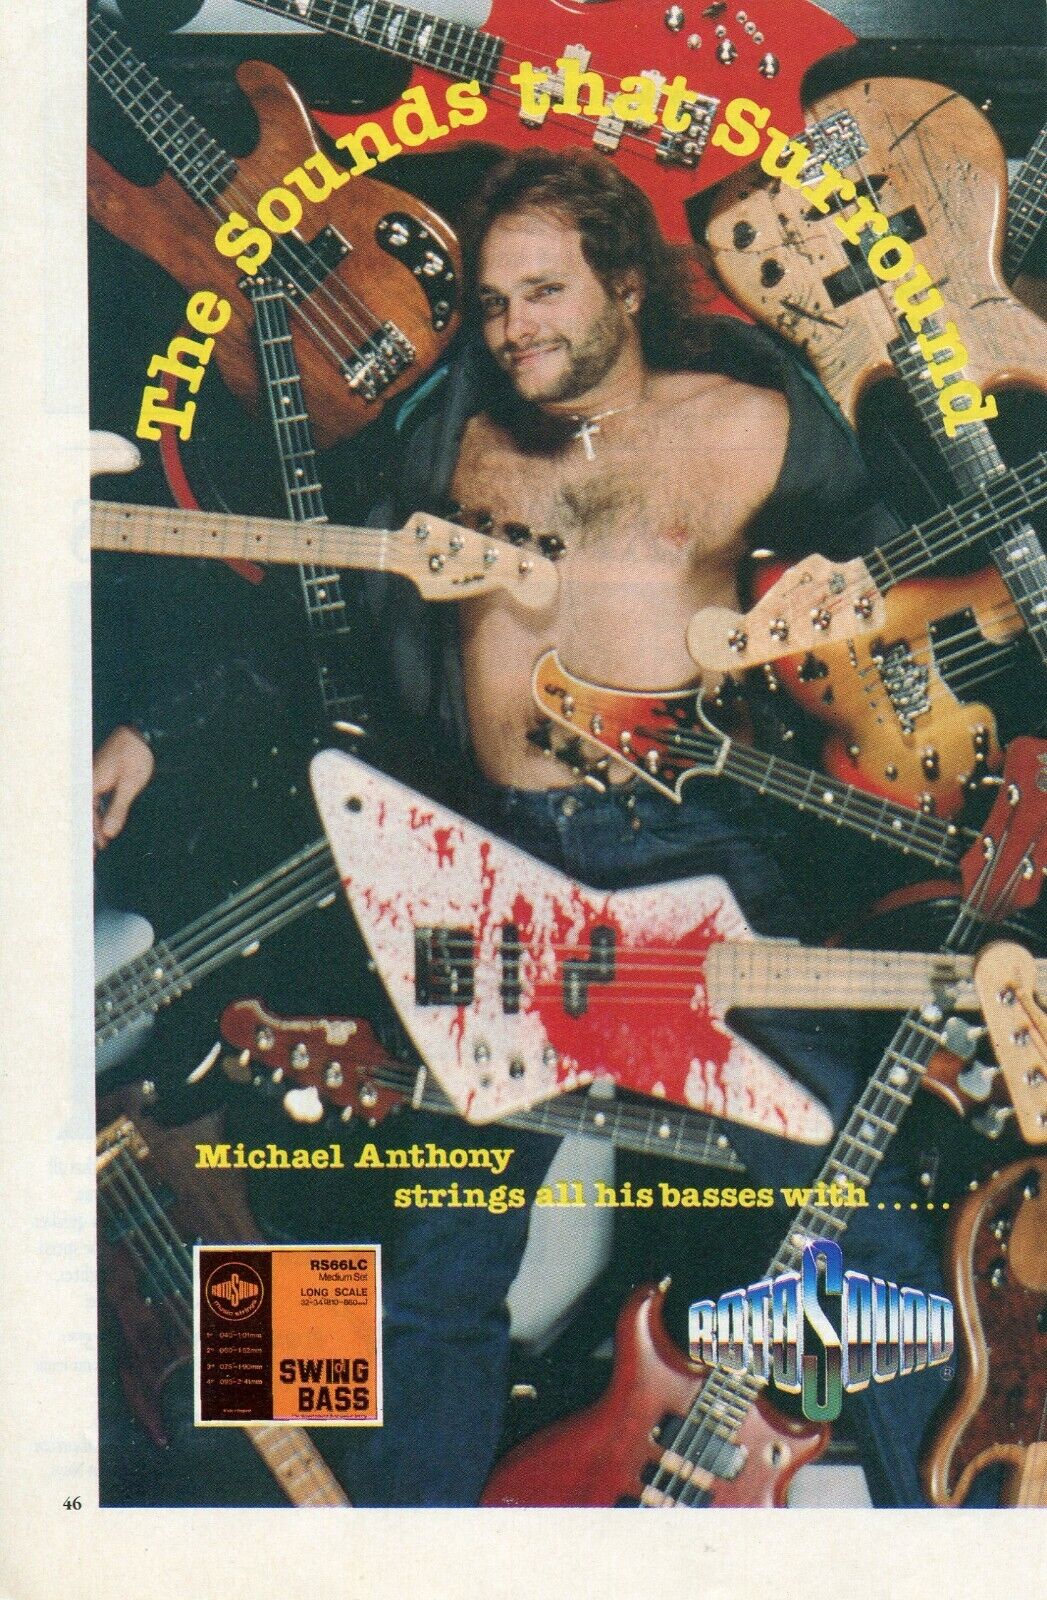 1987 small Print Ad of Roto Sound Bass Guitar Strings w Michael Anthony